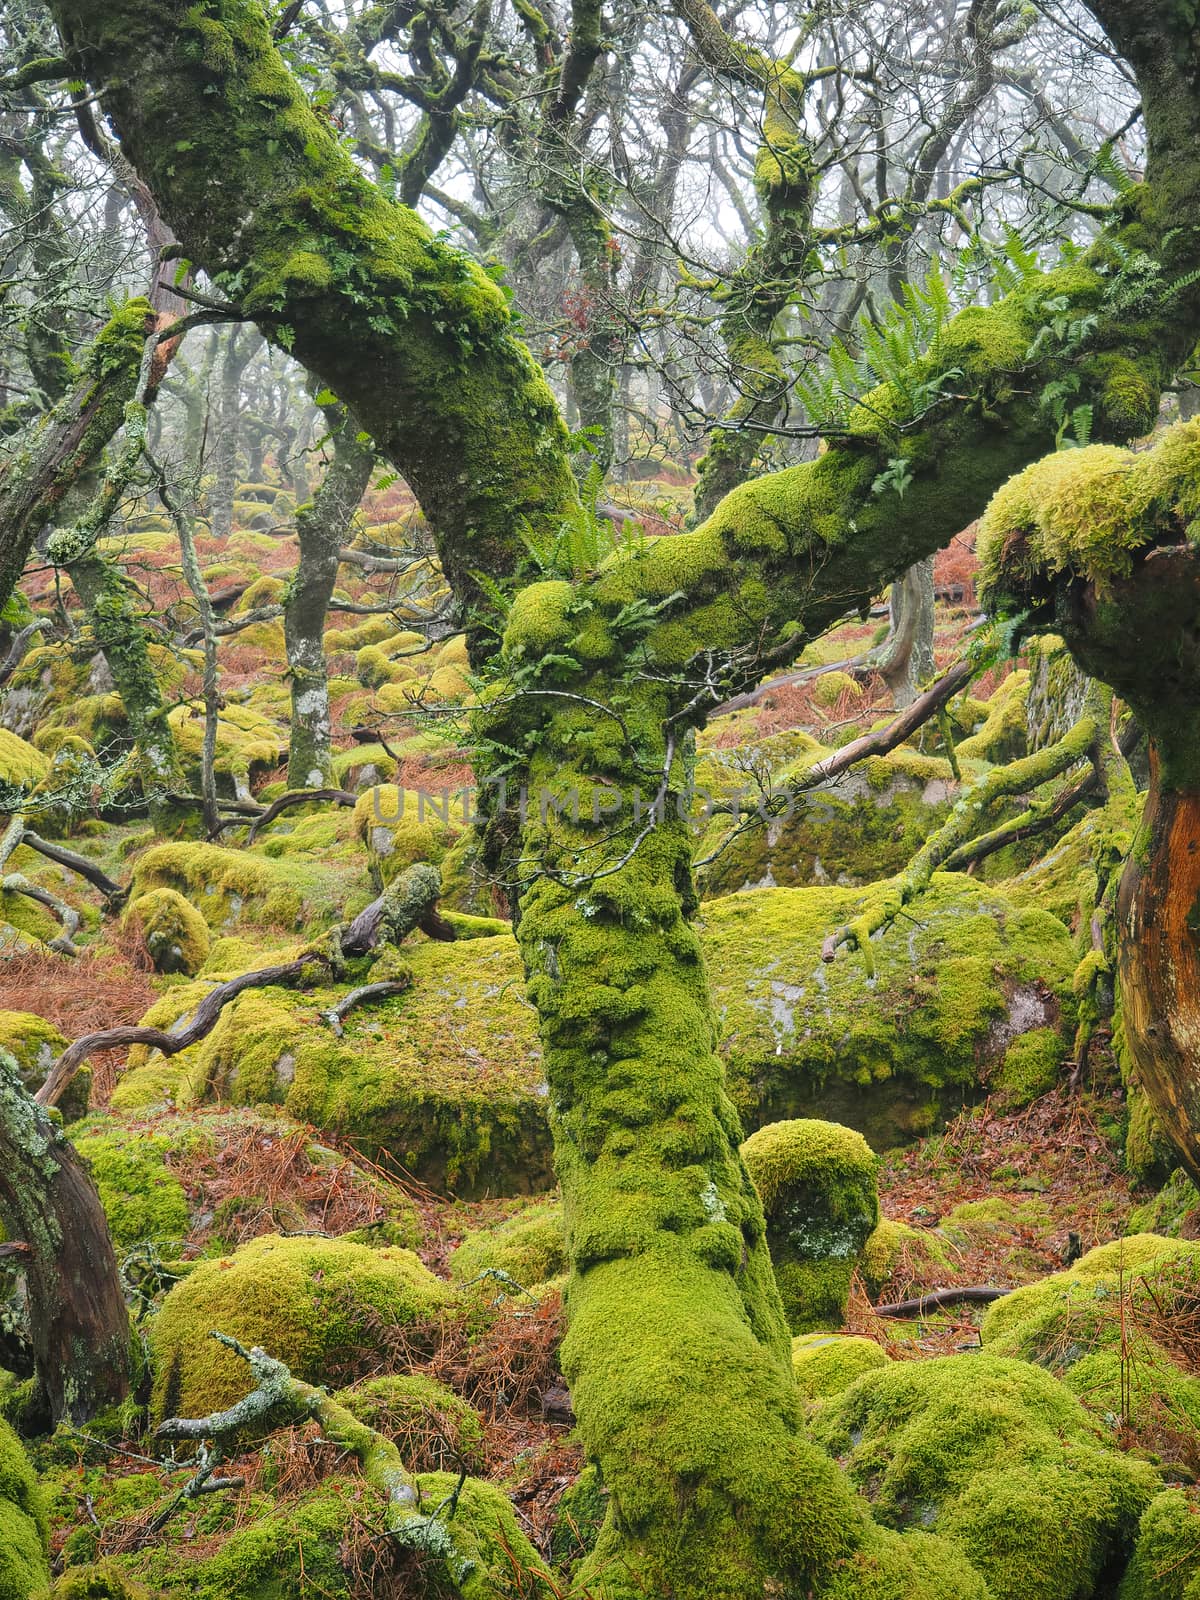 Black-a-Tor Copse high altitude oak woodland above the West Okement River where the bright green lichens and mosses cover the rocks and trees, Dartmoor National Park, Devon, UK